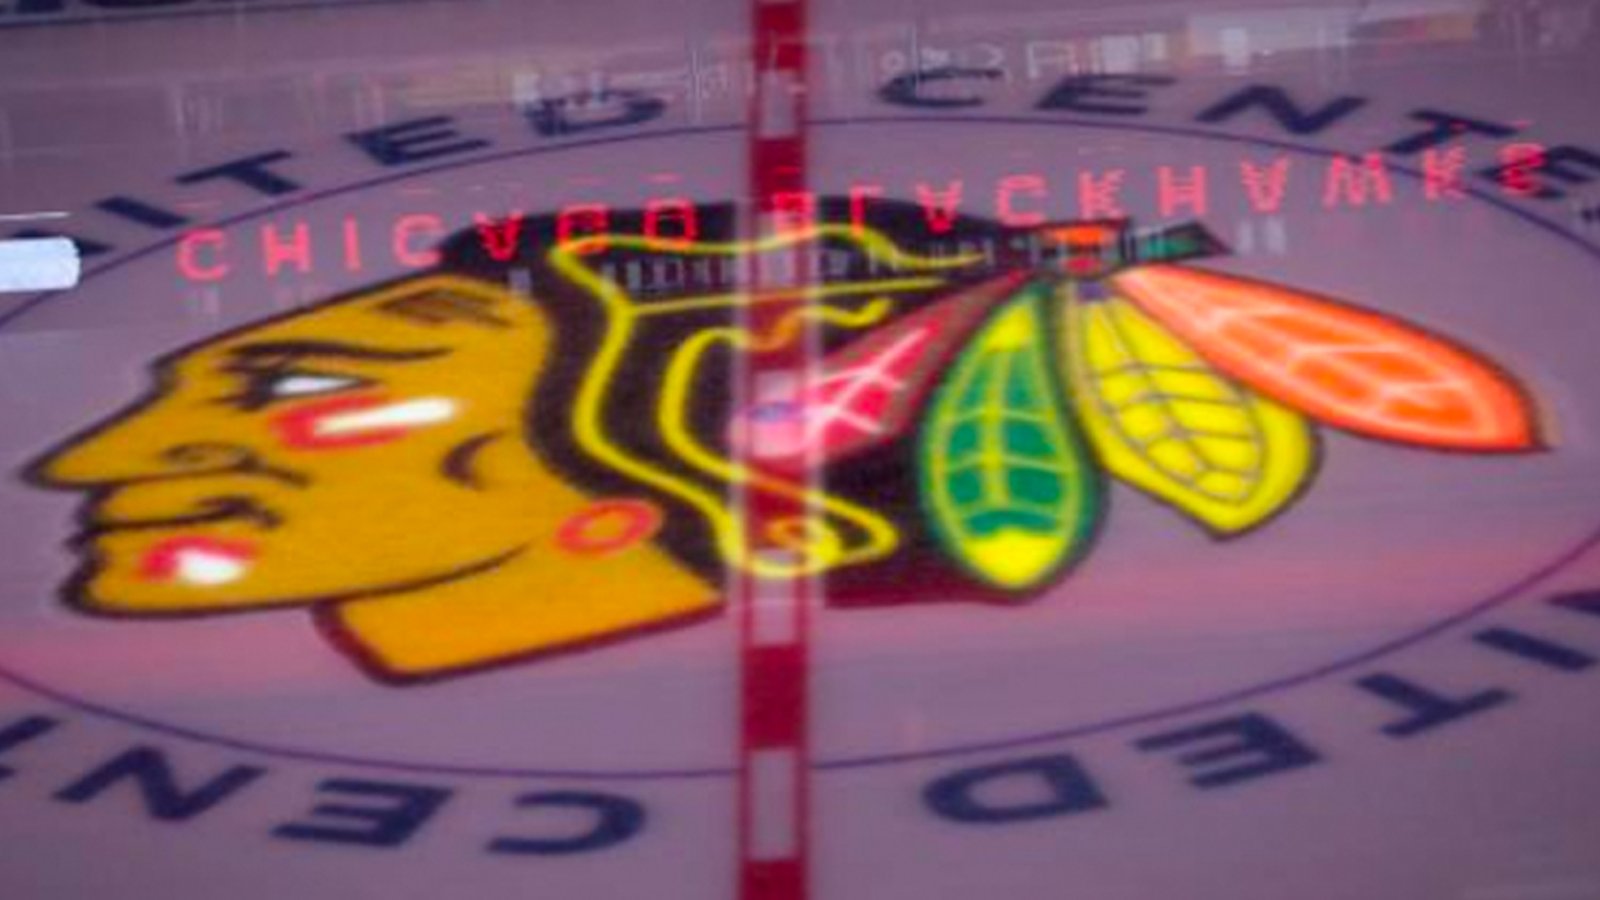 Report: Updated details on Blackhawks' lawsuit, Aldrich allegedly threatened the victim with a baseball bat